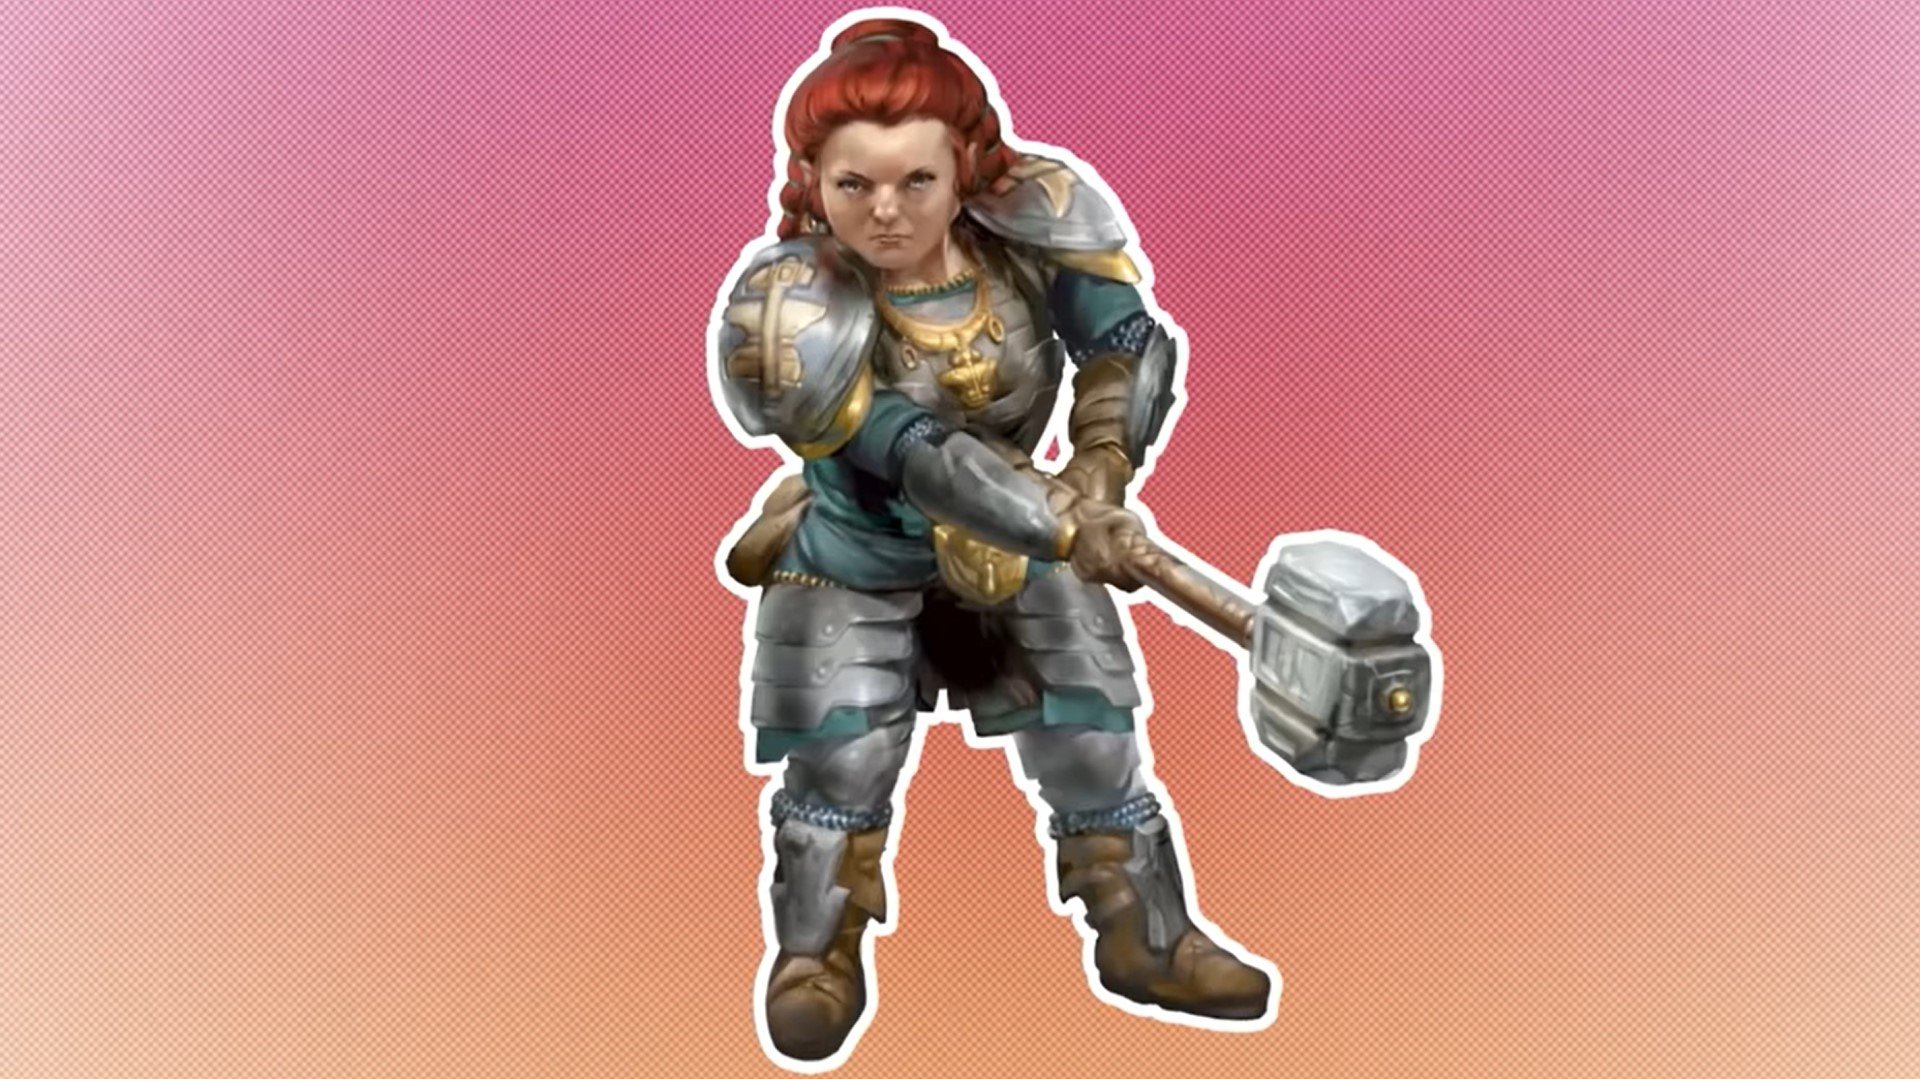 DnD dwarf 5e woman with red hair and a hammer